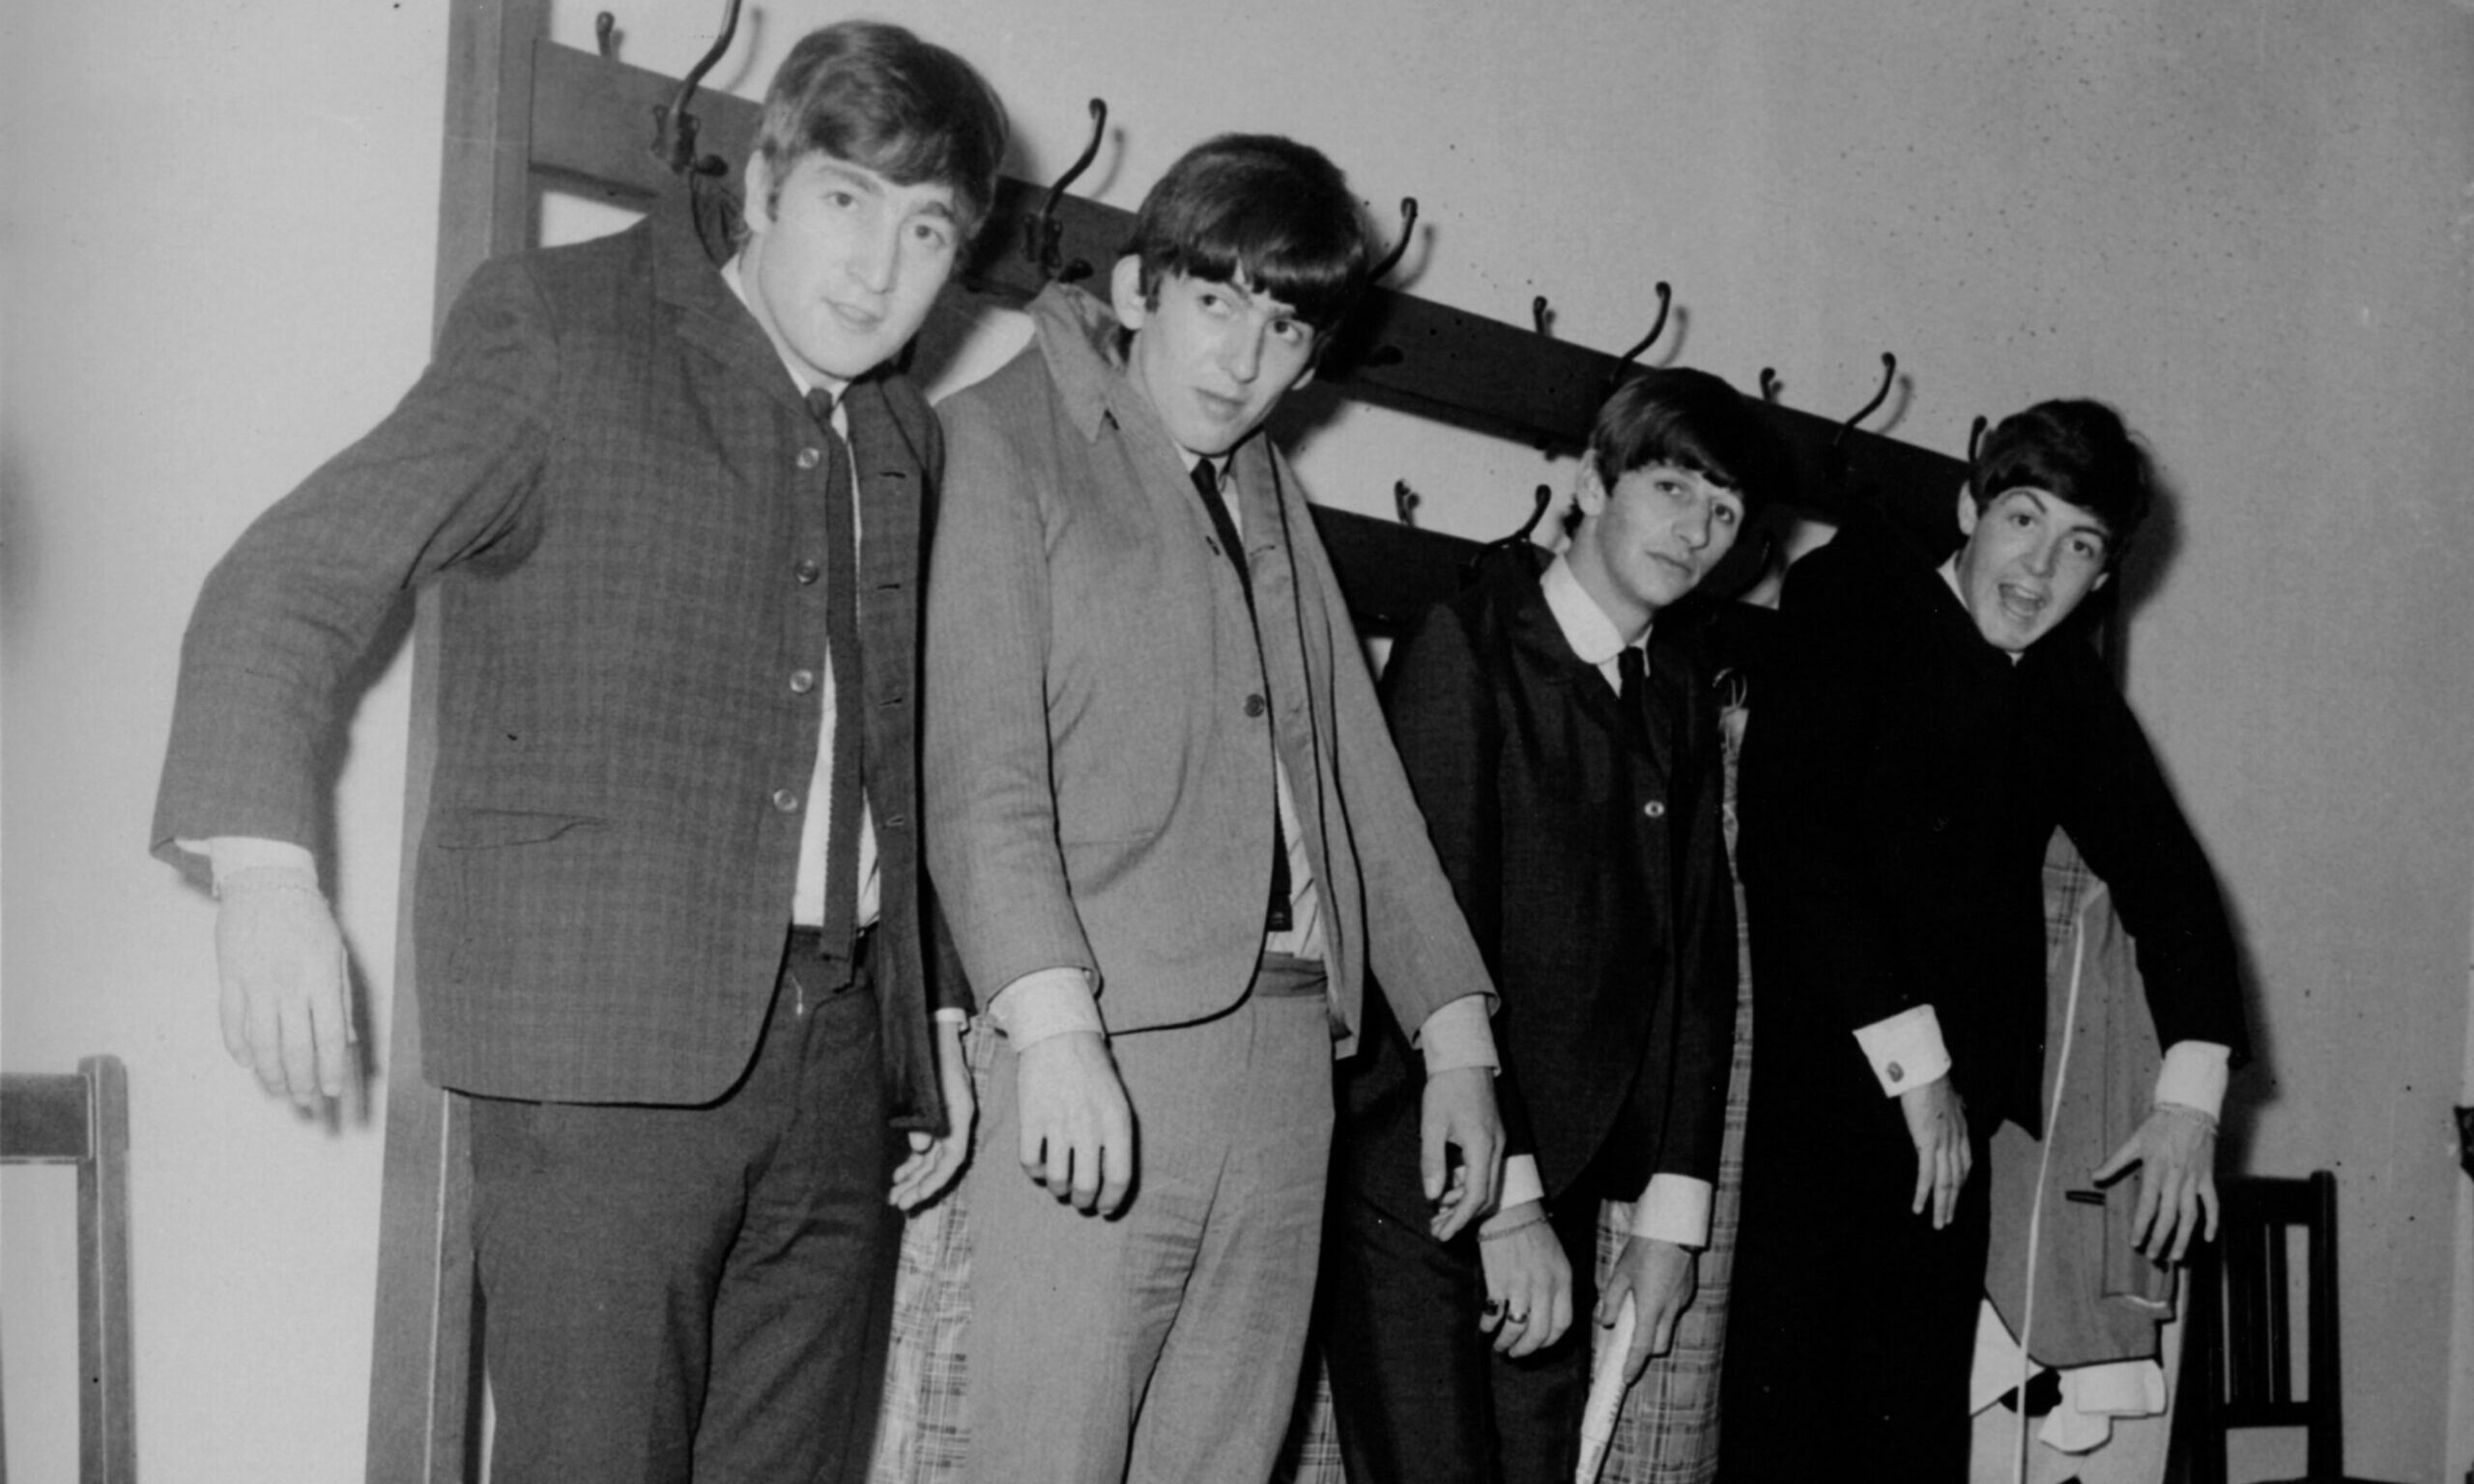 The Beatles hang out backstage at The Caird Hall in Dundee.